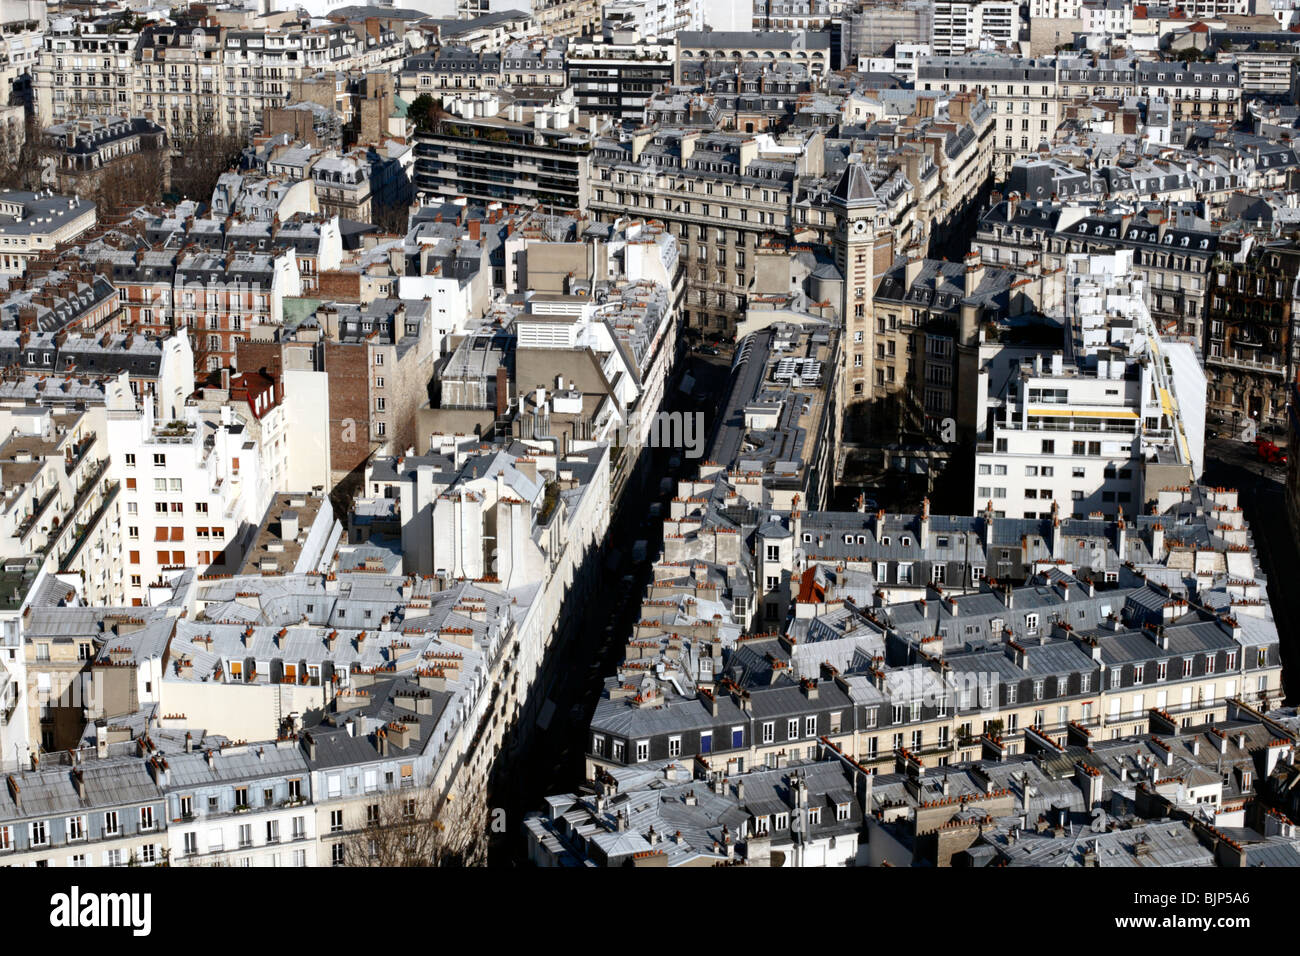 View of buildings on the Left Bank, Paris, from the Eiffel Tower, France Stock Photo